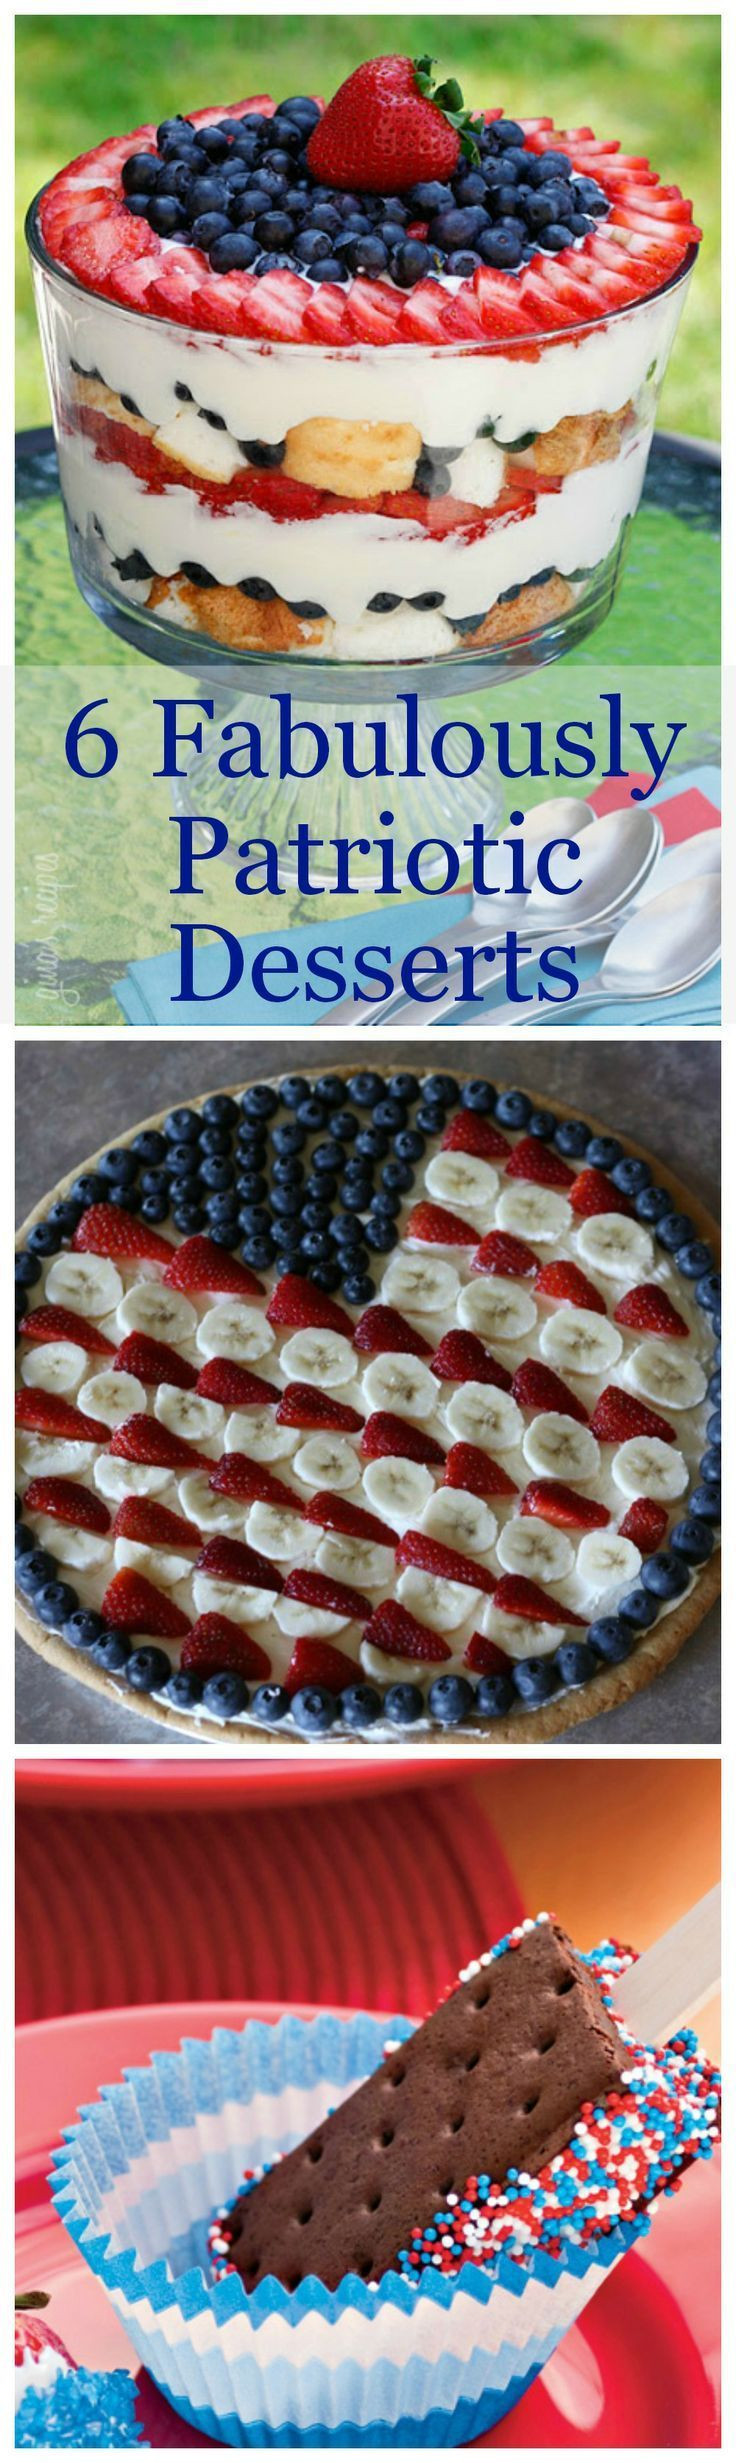 4Th July Desserts
 10 best images about 4th of July on Pinterest